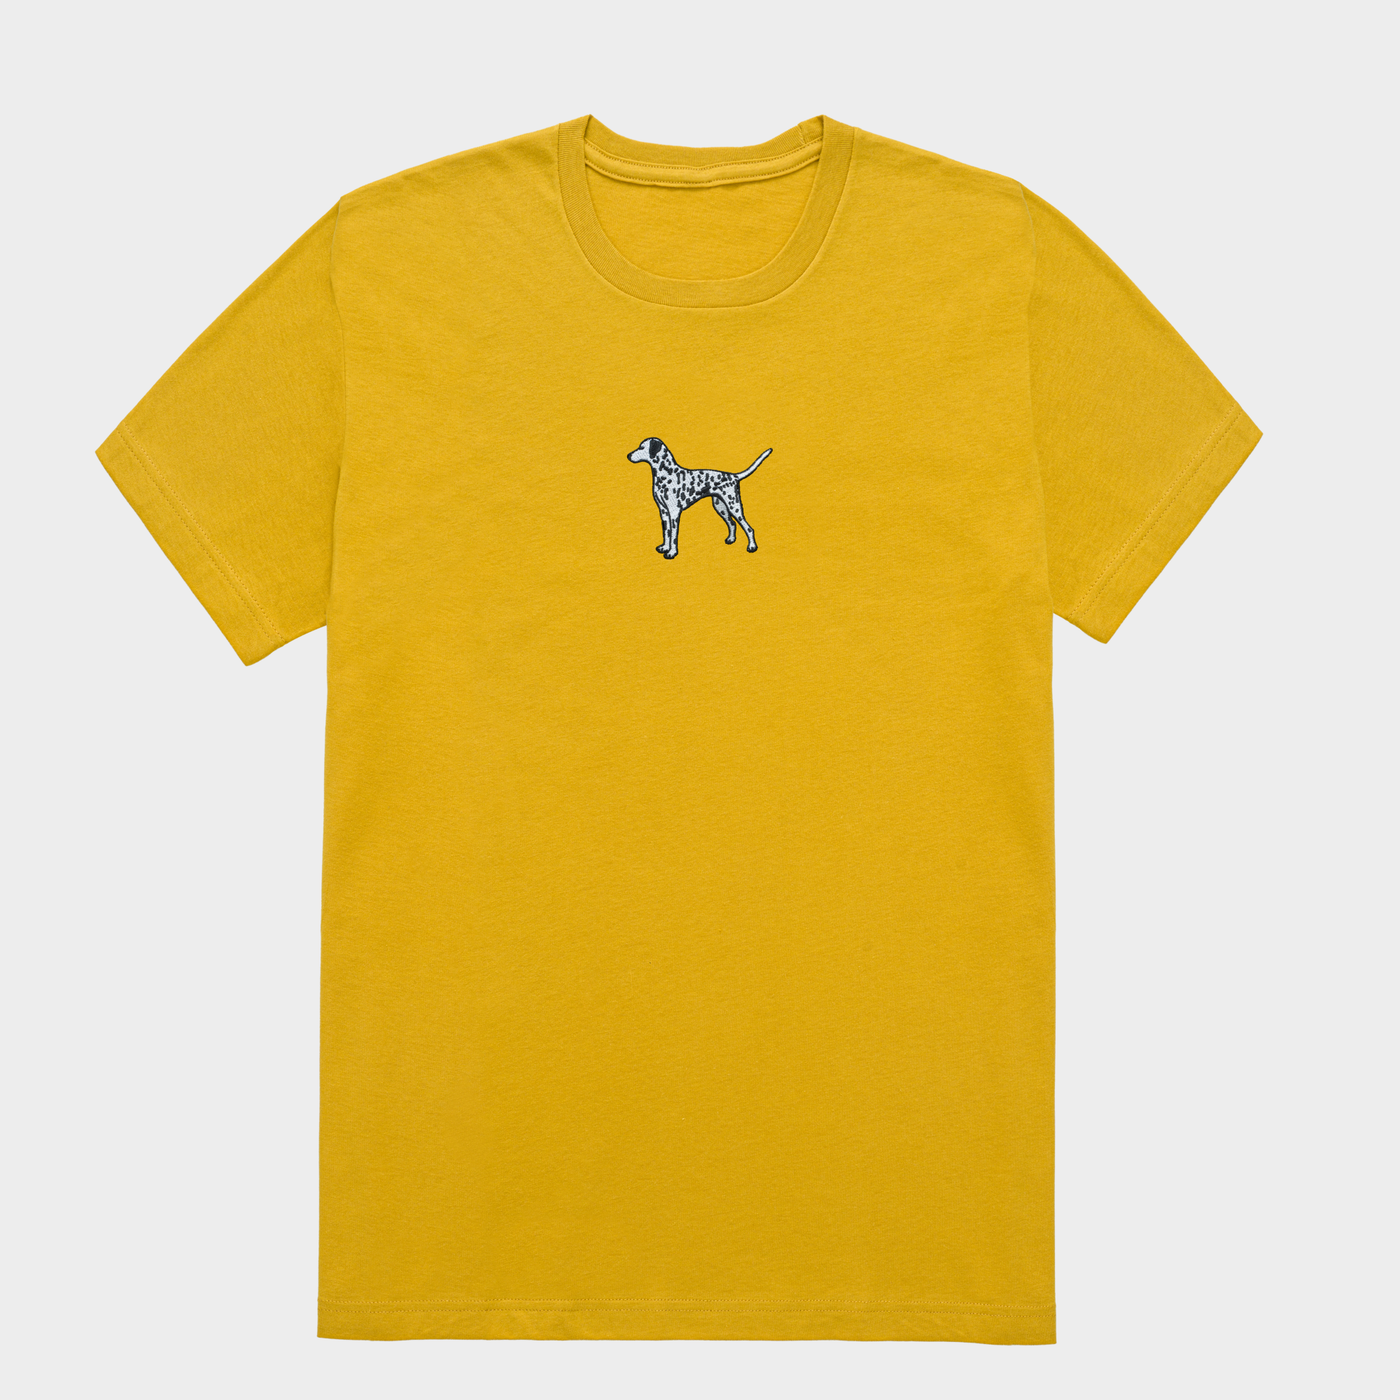 Bobby's Planet Women's Embroidered Dalmatian T-Shirt from Paws Dog Cat Animals Collection in Mustard Color#color_mustard